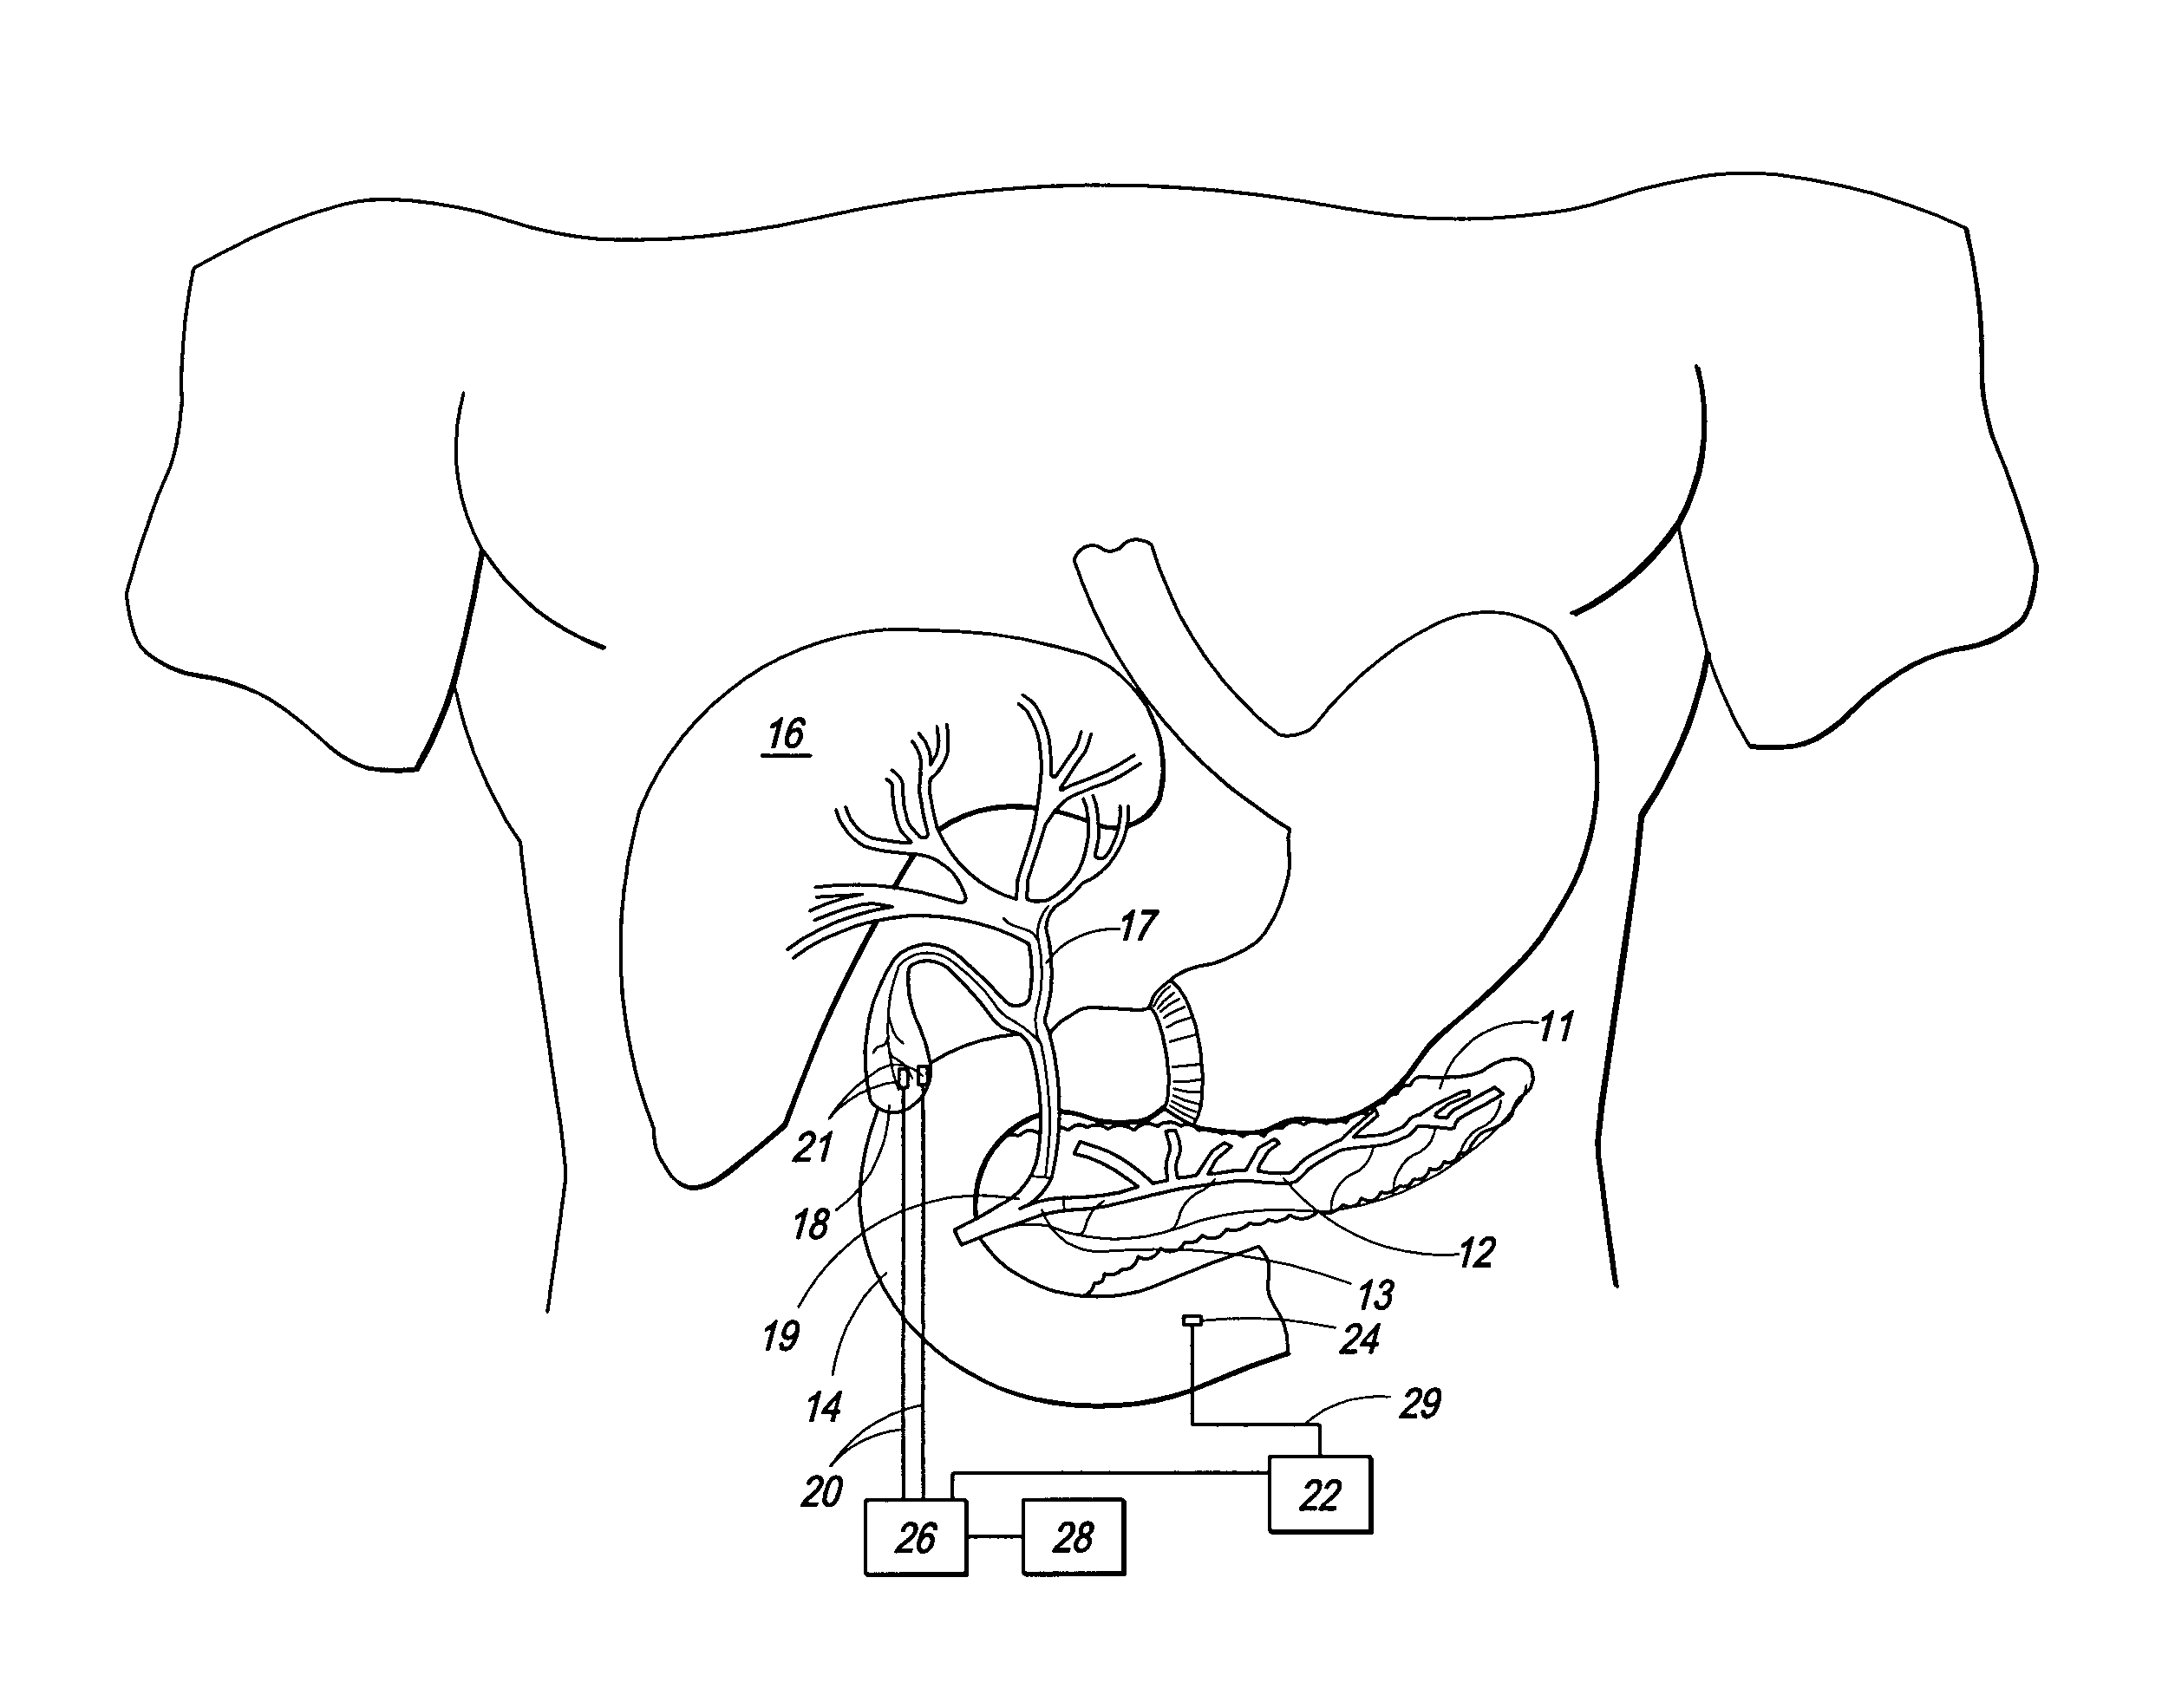 Method and apparatus for electrical stimulation of the pancreatico-biliary system